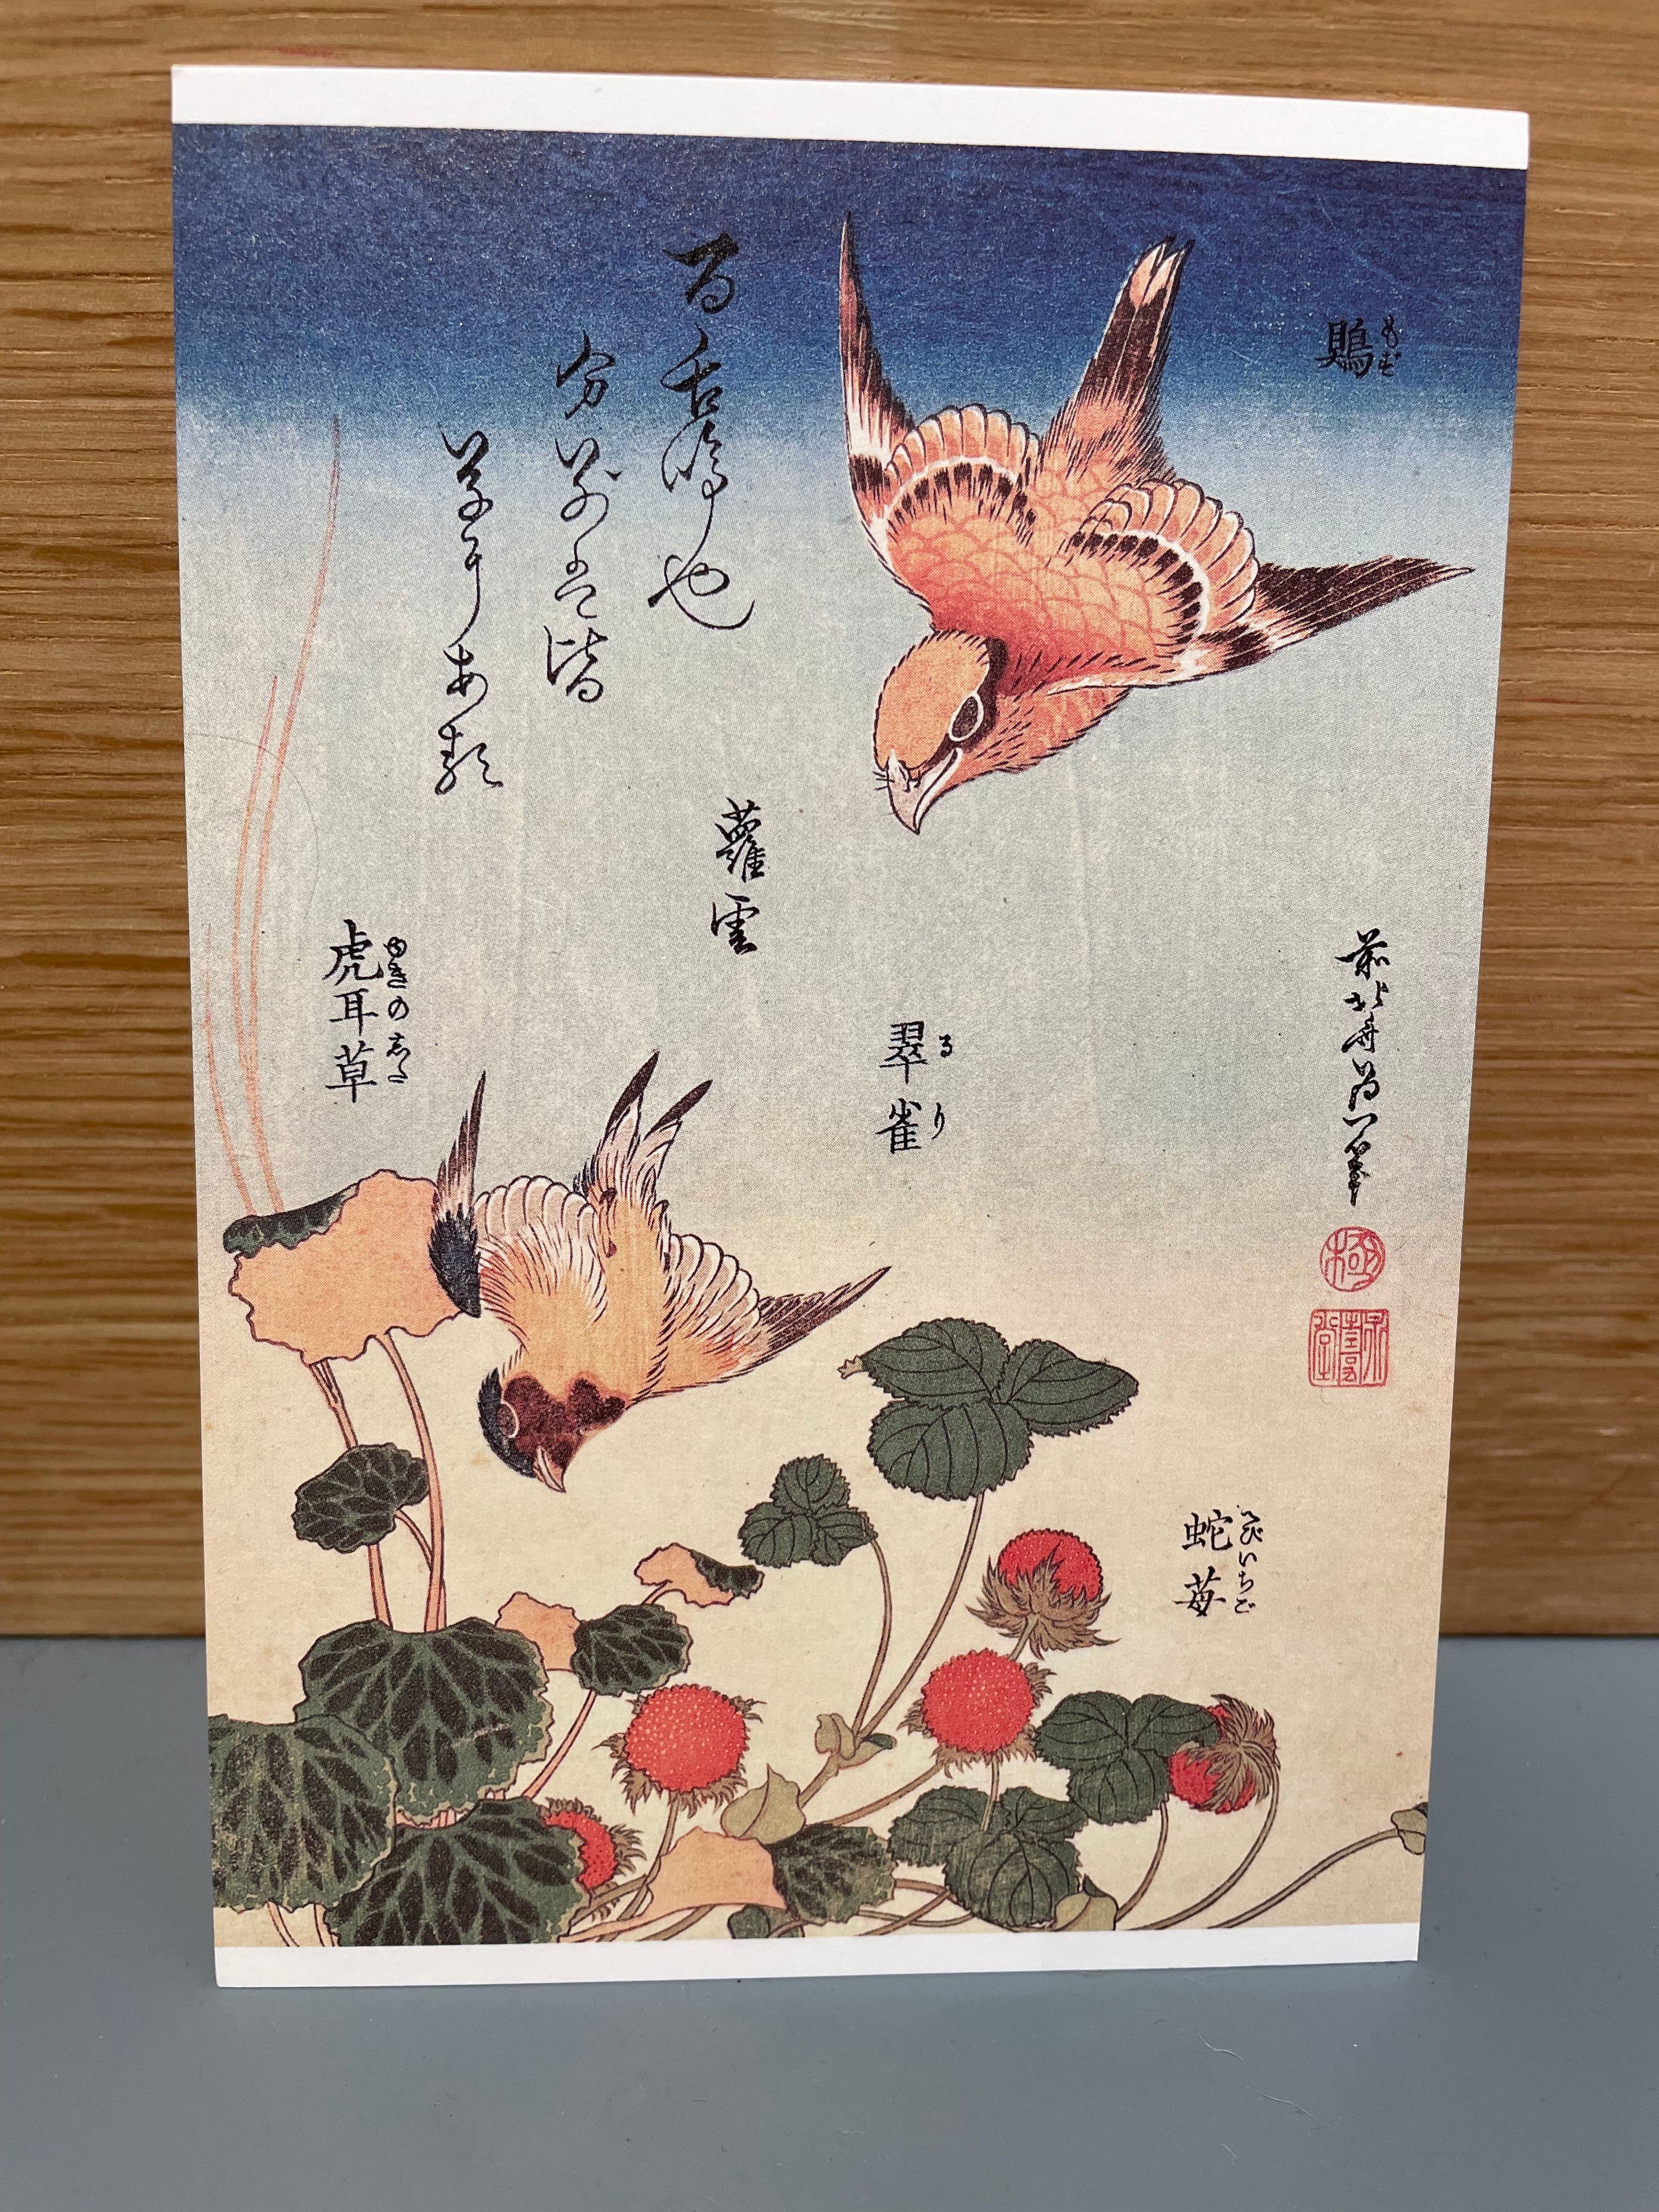 Card with birds and Japanese characters